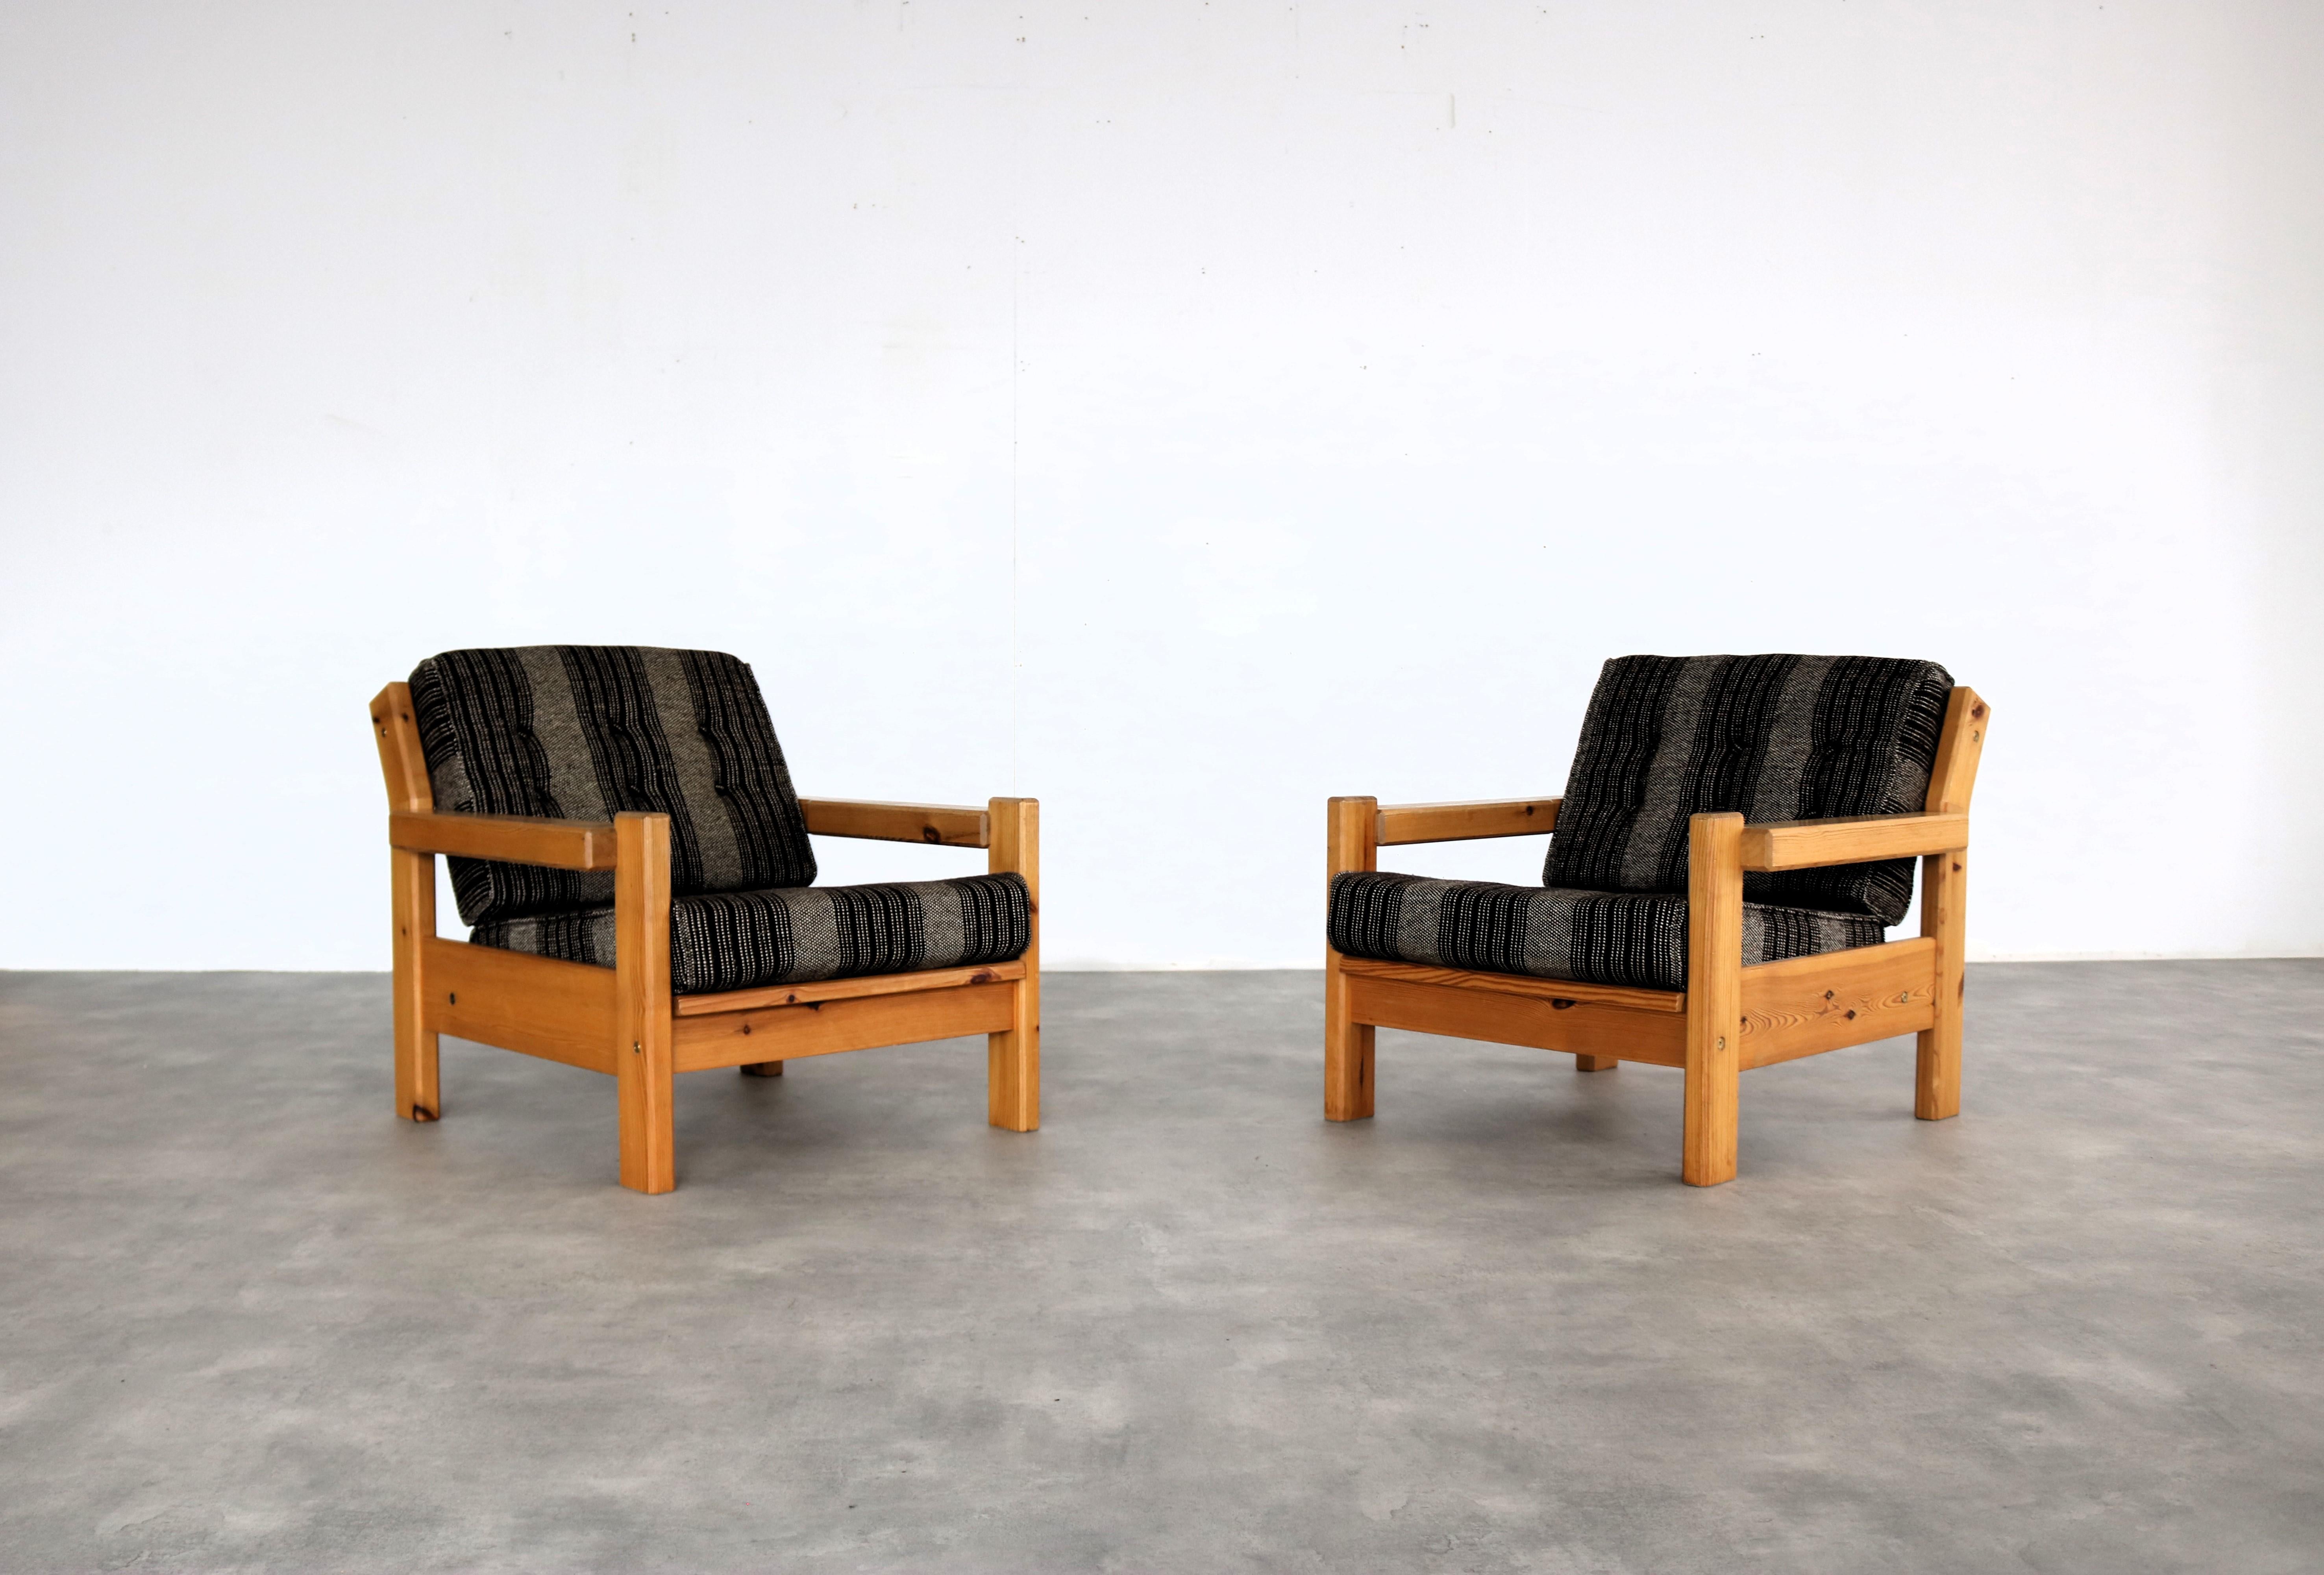 vintage seating group | armchairs | coffee table | 70's | Sweden

period | 60's
design | unknown | Sweden
condition | good | light signs of use
size | 72 x 77 x 85 (hxwxd) seat height 38 cm;
size | 48x72x72

details | set of 2 armchairs + coffee